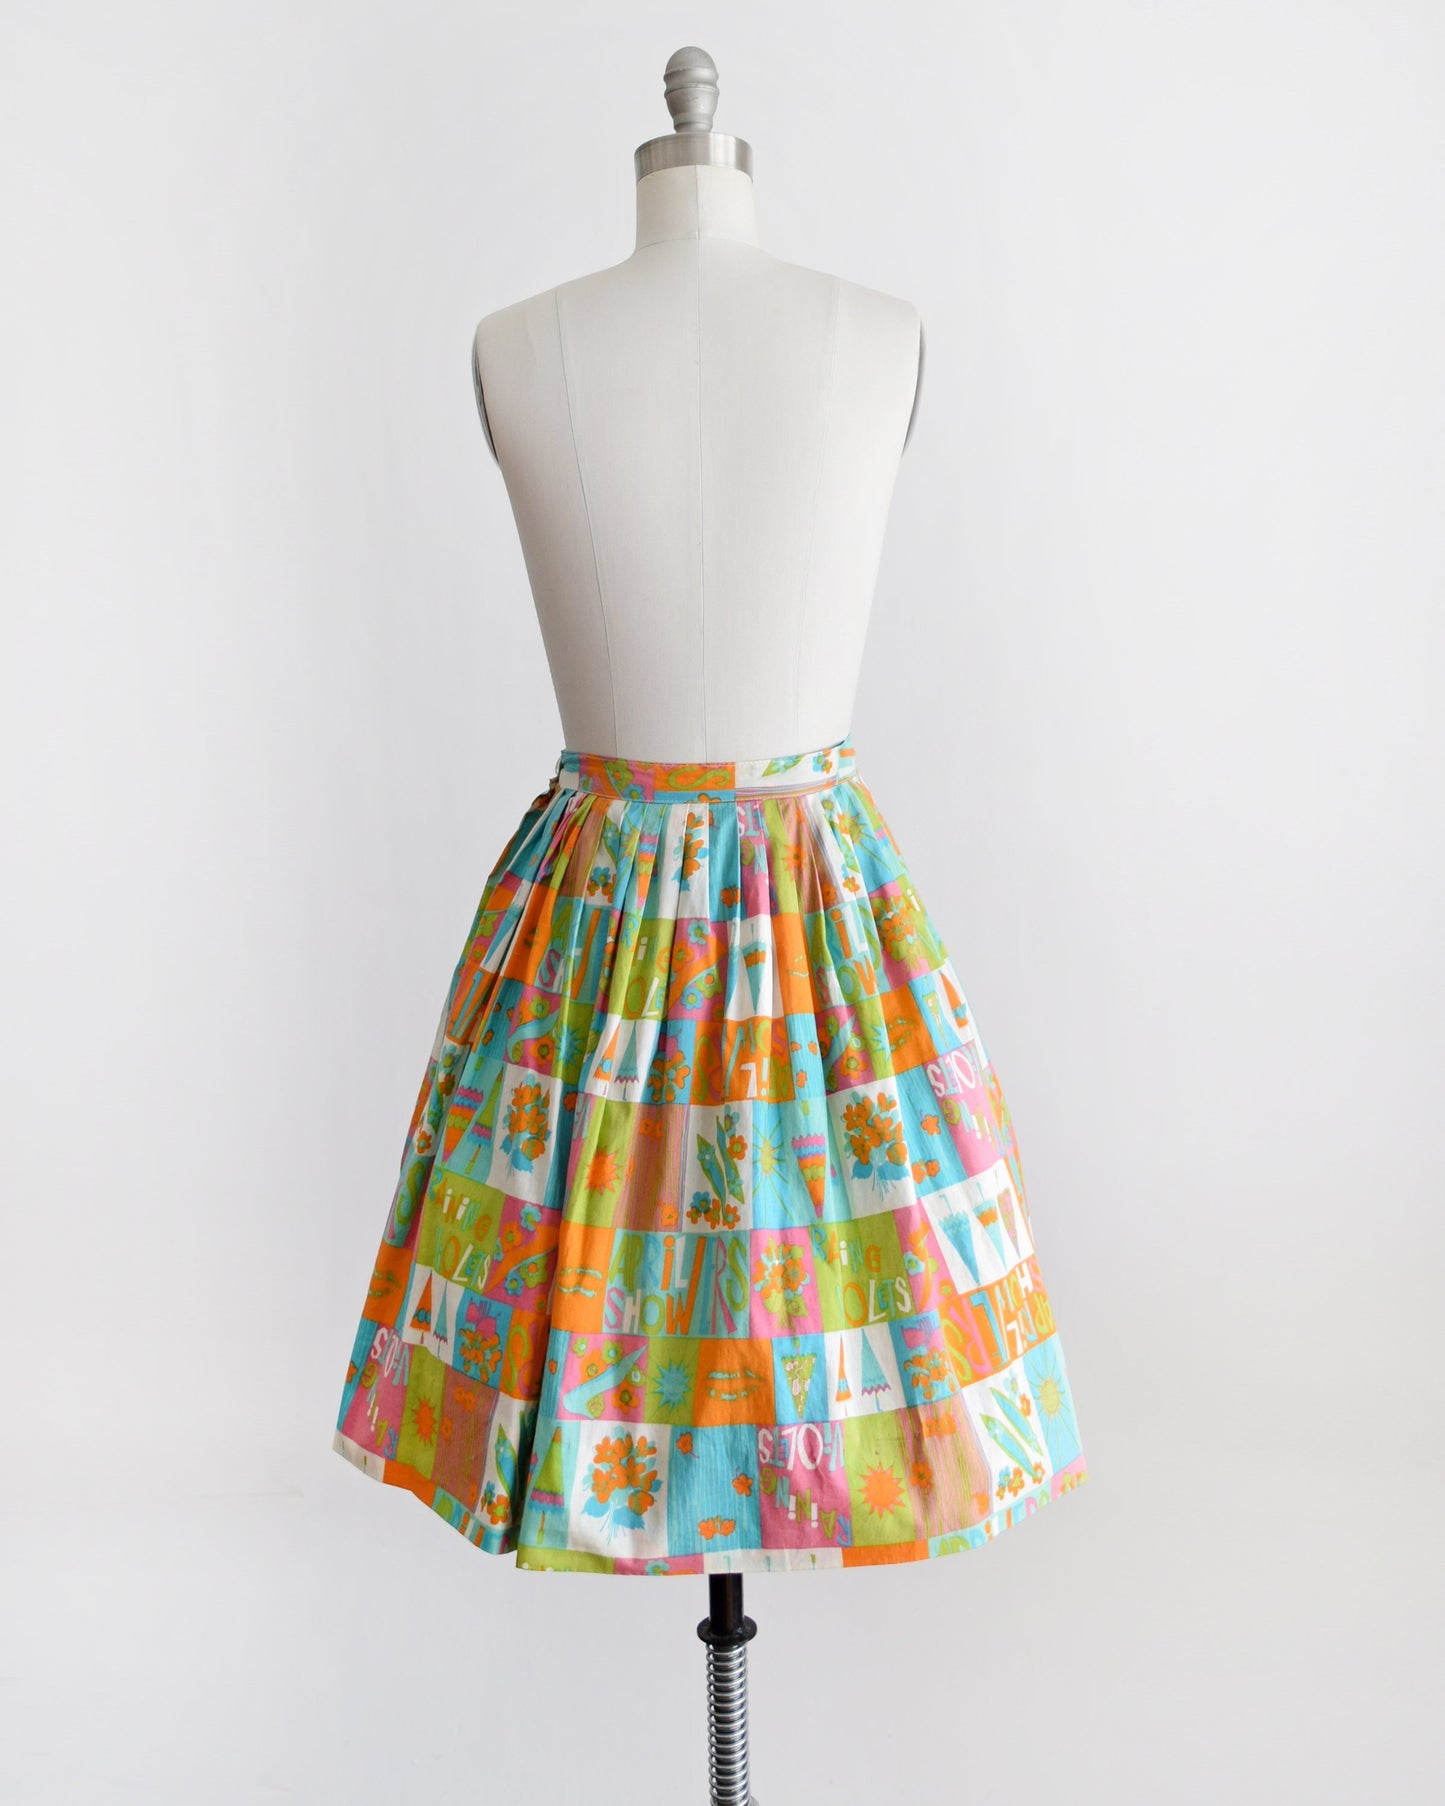 Back view of a vintage 50s skirt has an April showers theme with colorful blocks of flowers, umbrellas, shoes, the sun, and the words April Showers and Raining Violets in a classic mid century print. Skirt is modeled on a dress form